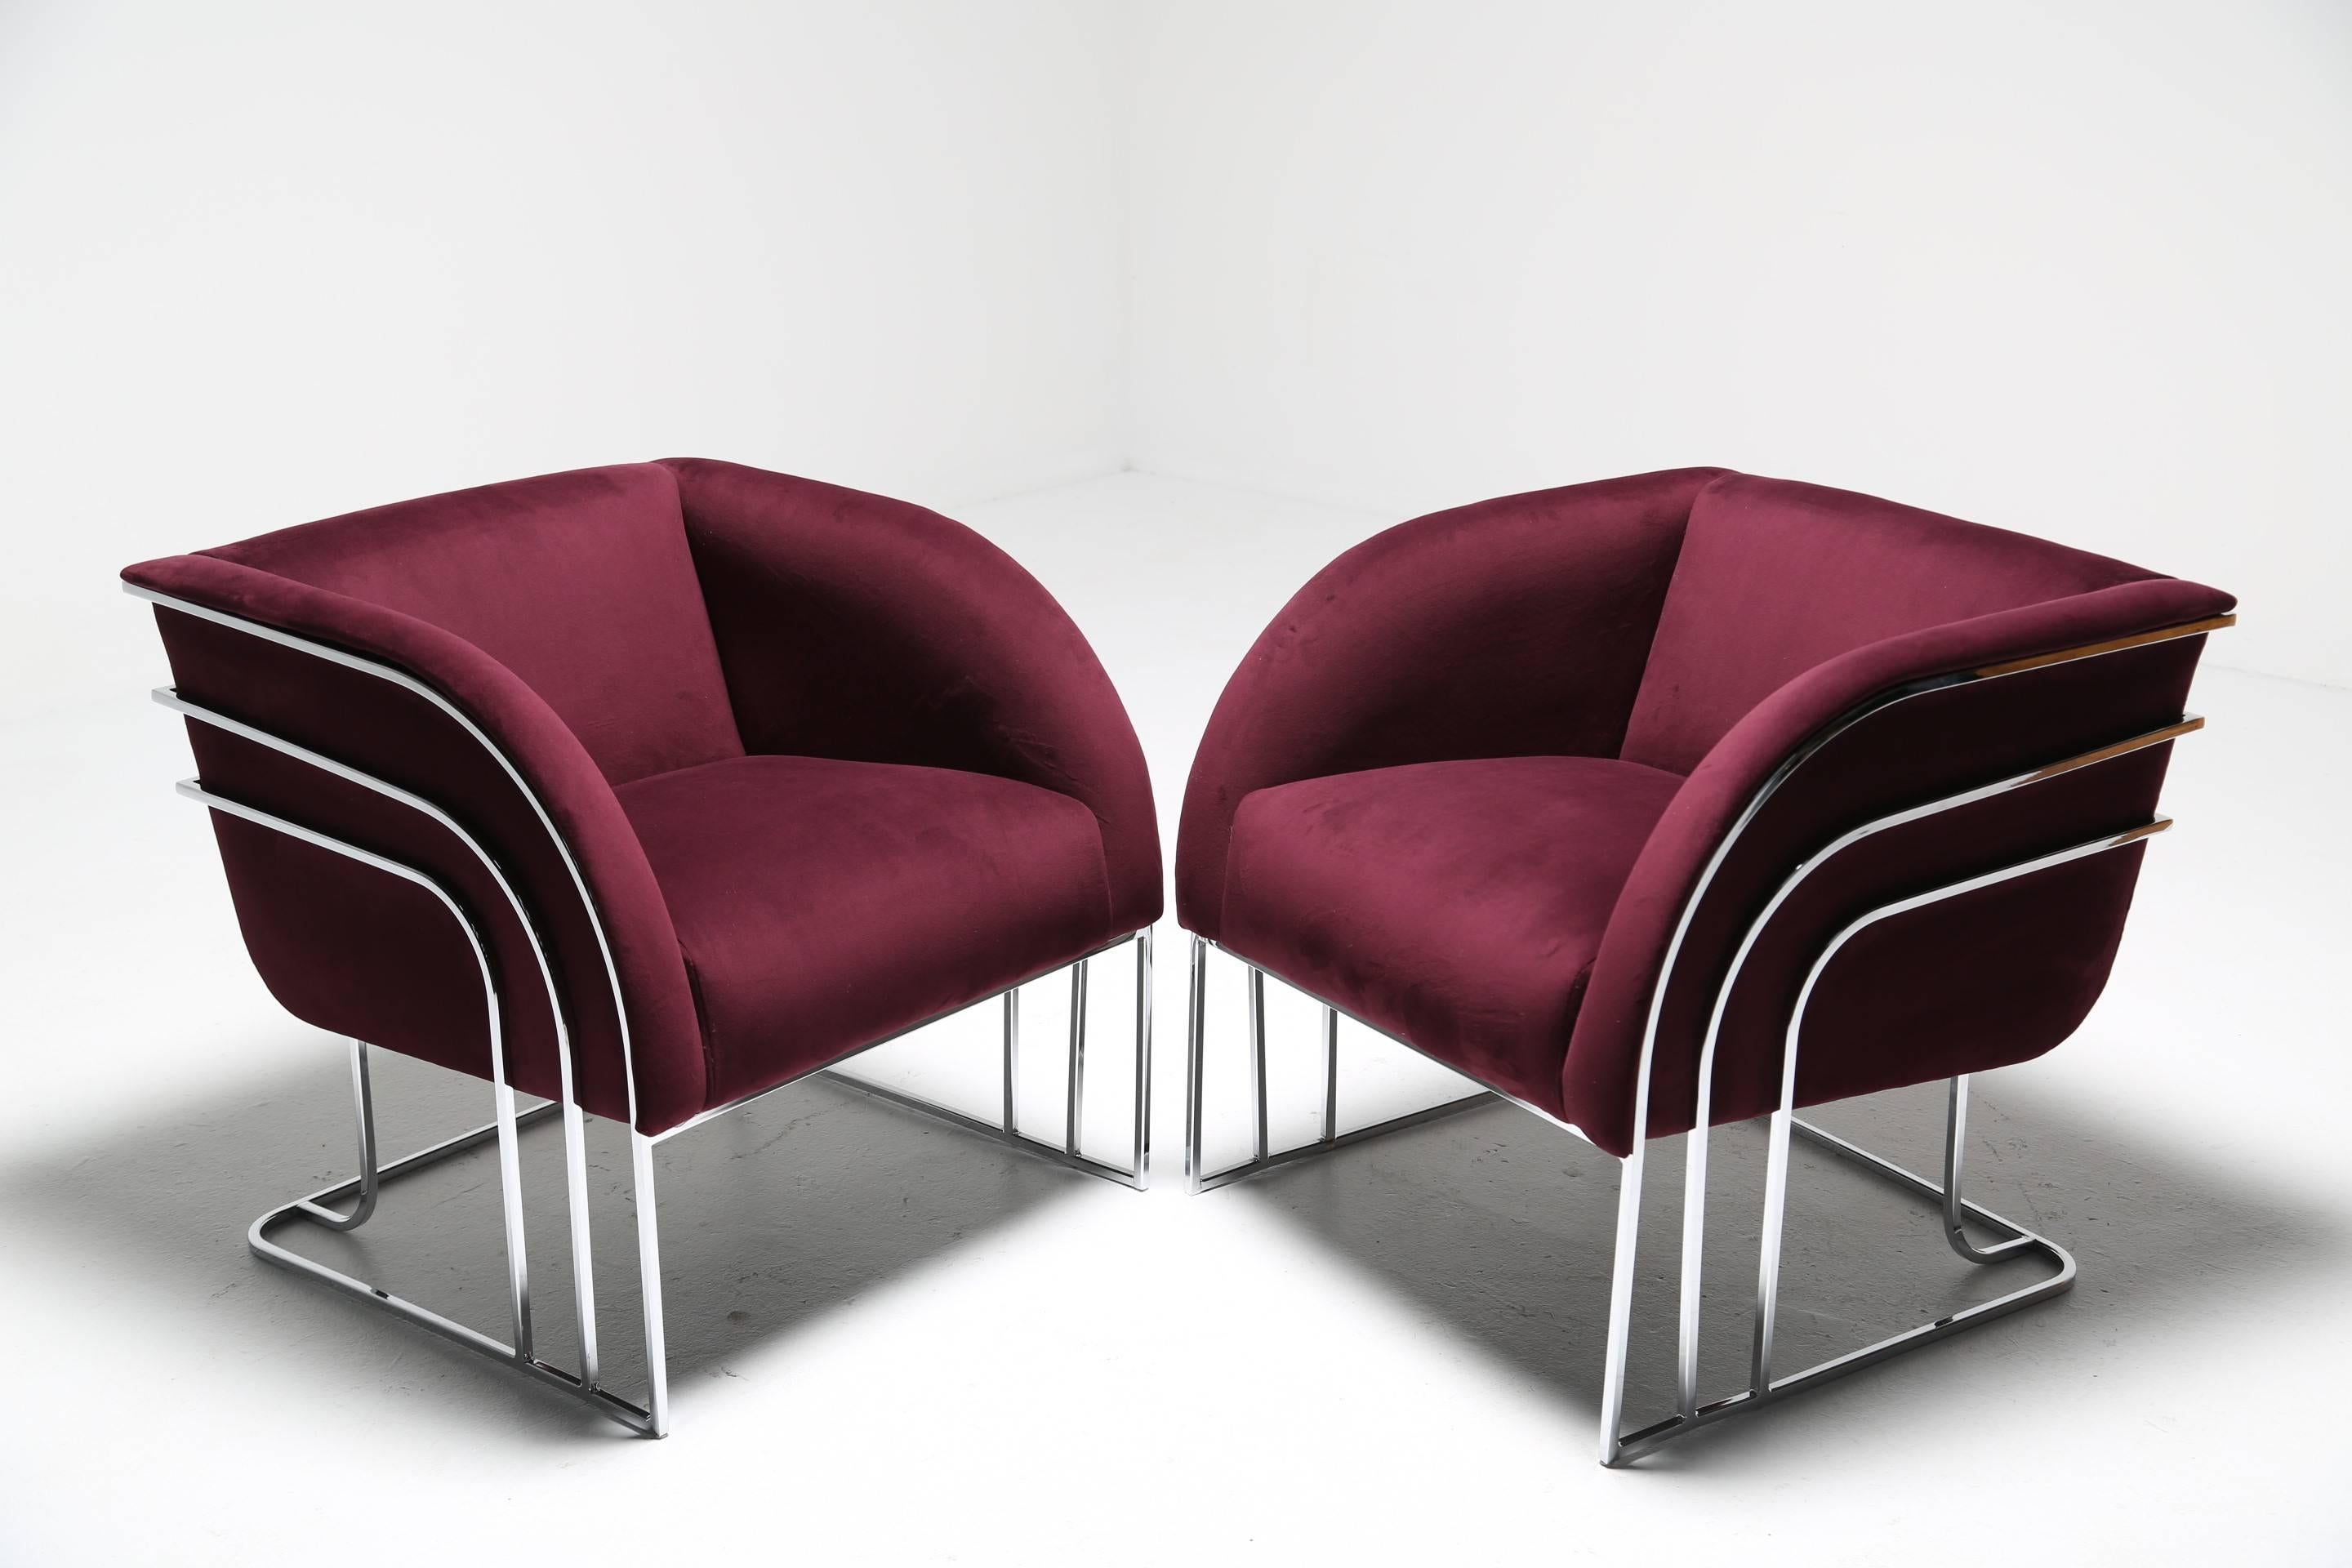 A pair of Art Deco styled chrome frame chairs in the manner of Milo Baughman. A beautifully stylish pair of lounge chairs recently covered in a purple velvet fabric. Very easily shipped worldwide.